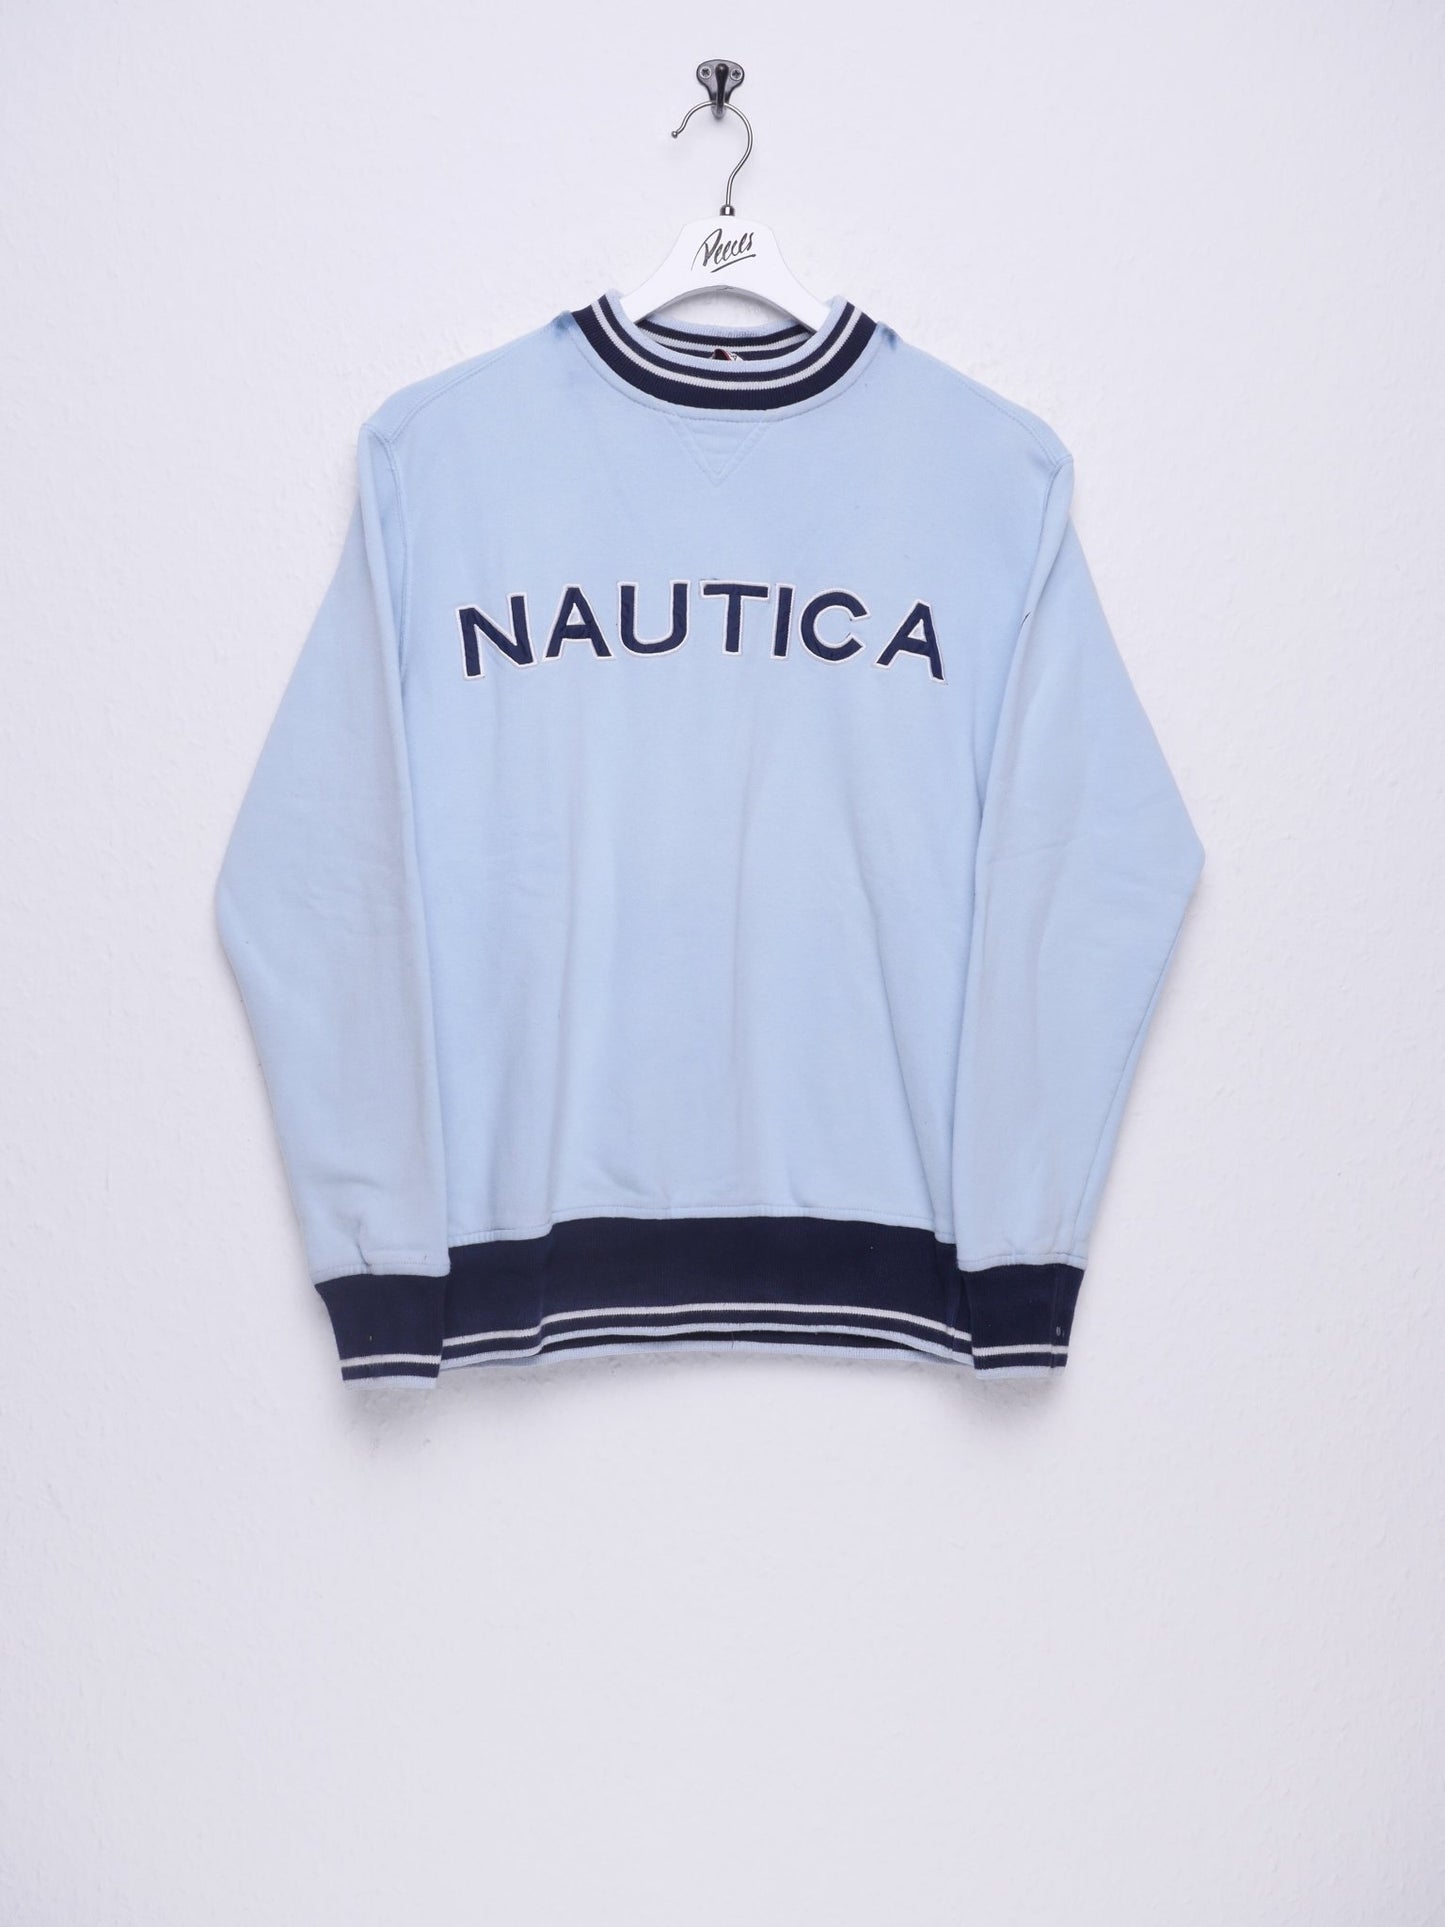 Nautica embroidered Spellout babyblue Sweater - Peeces